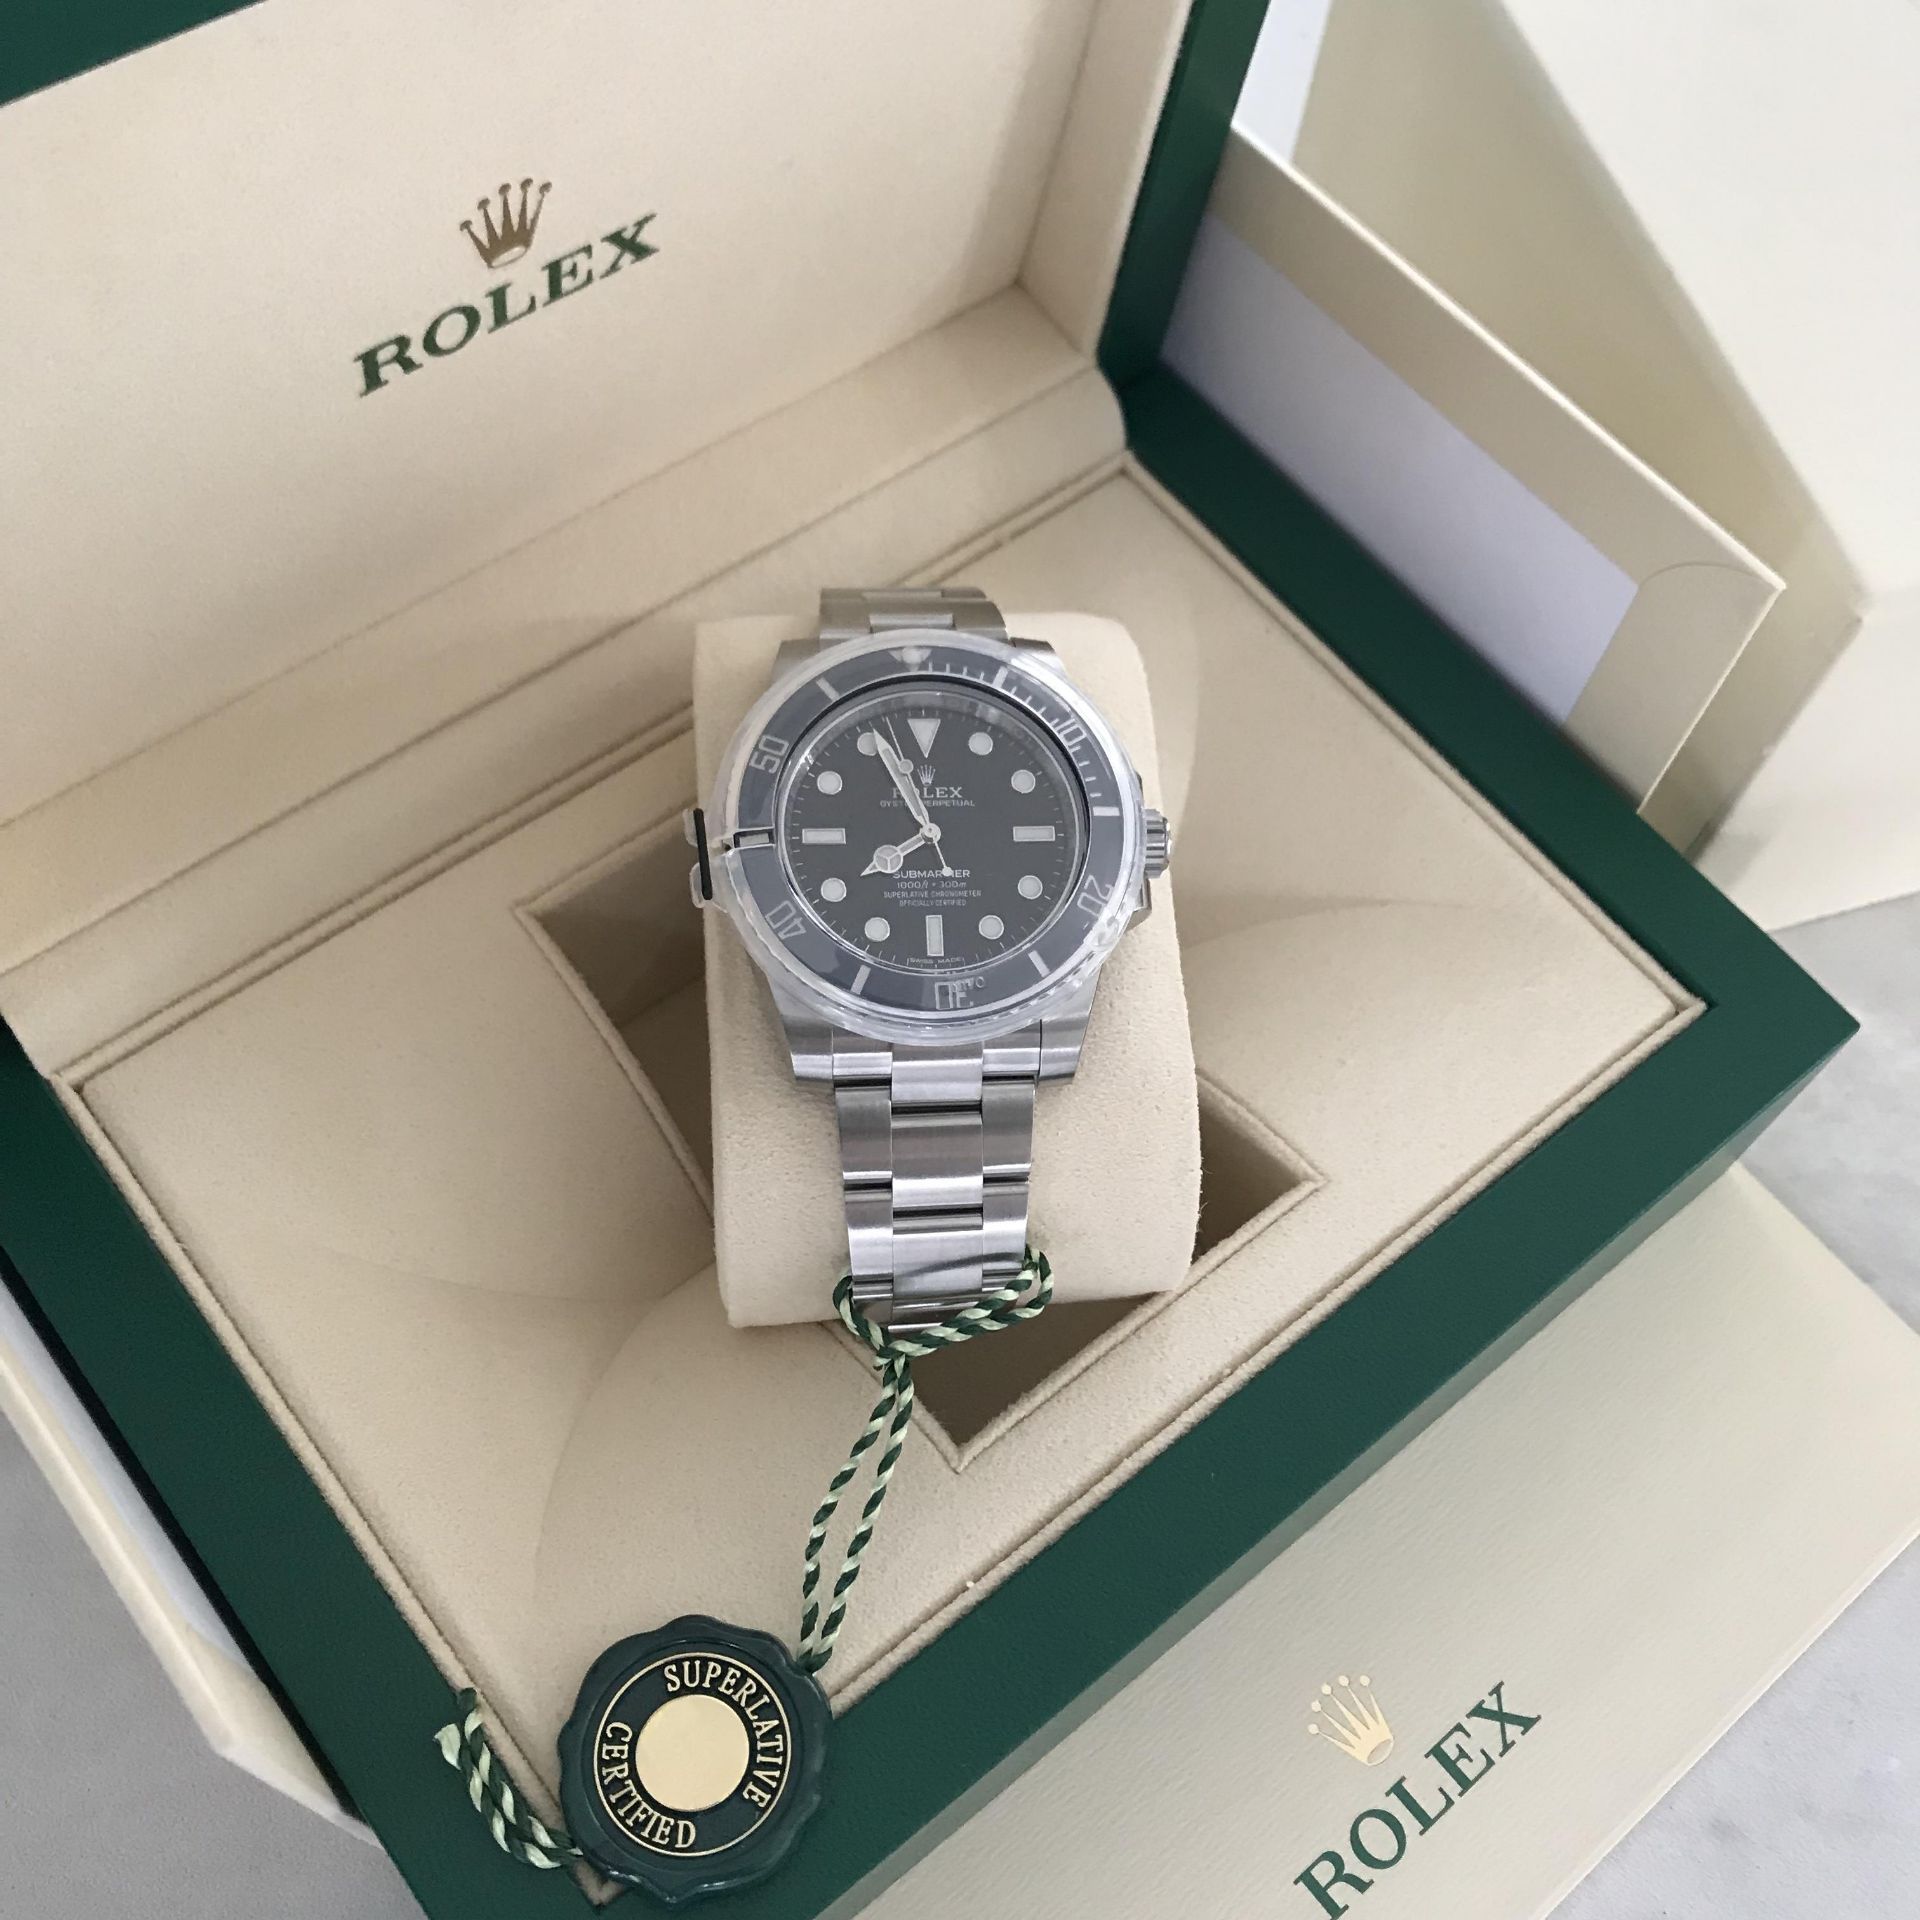 2020 ROLEX SUBMARINER OYSTER STEEL 40 MM WATCH 114060 - Image 7 of 15